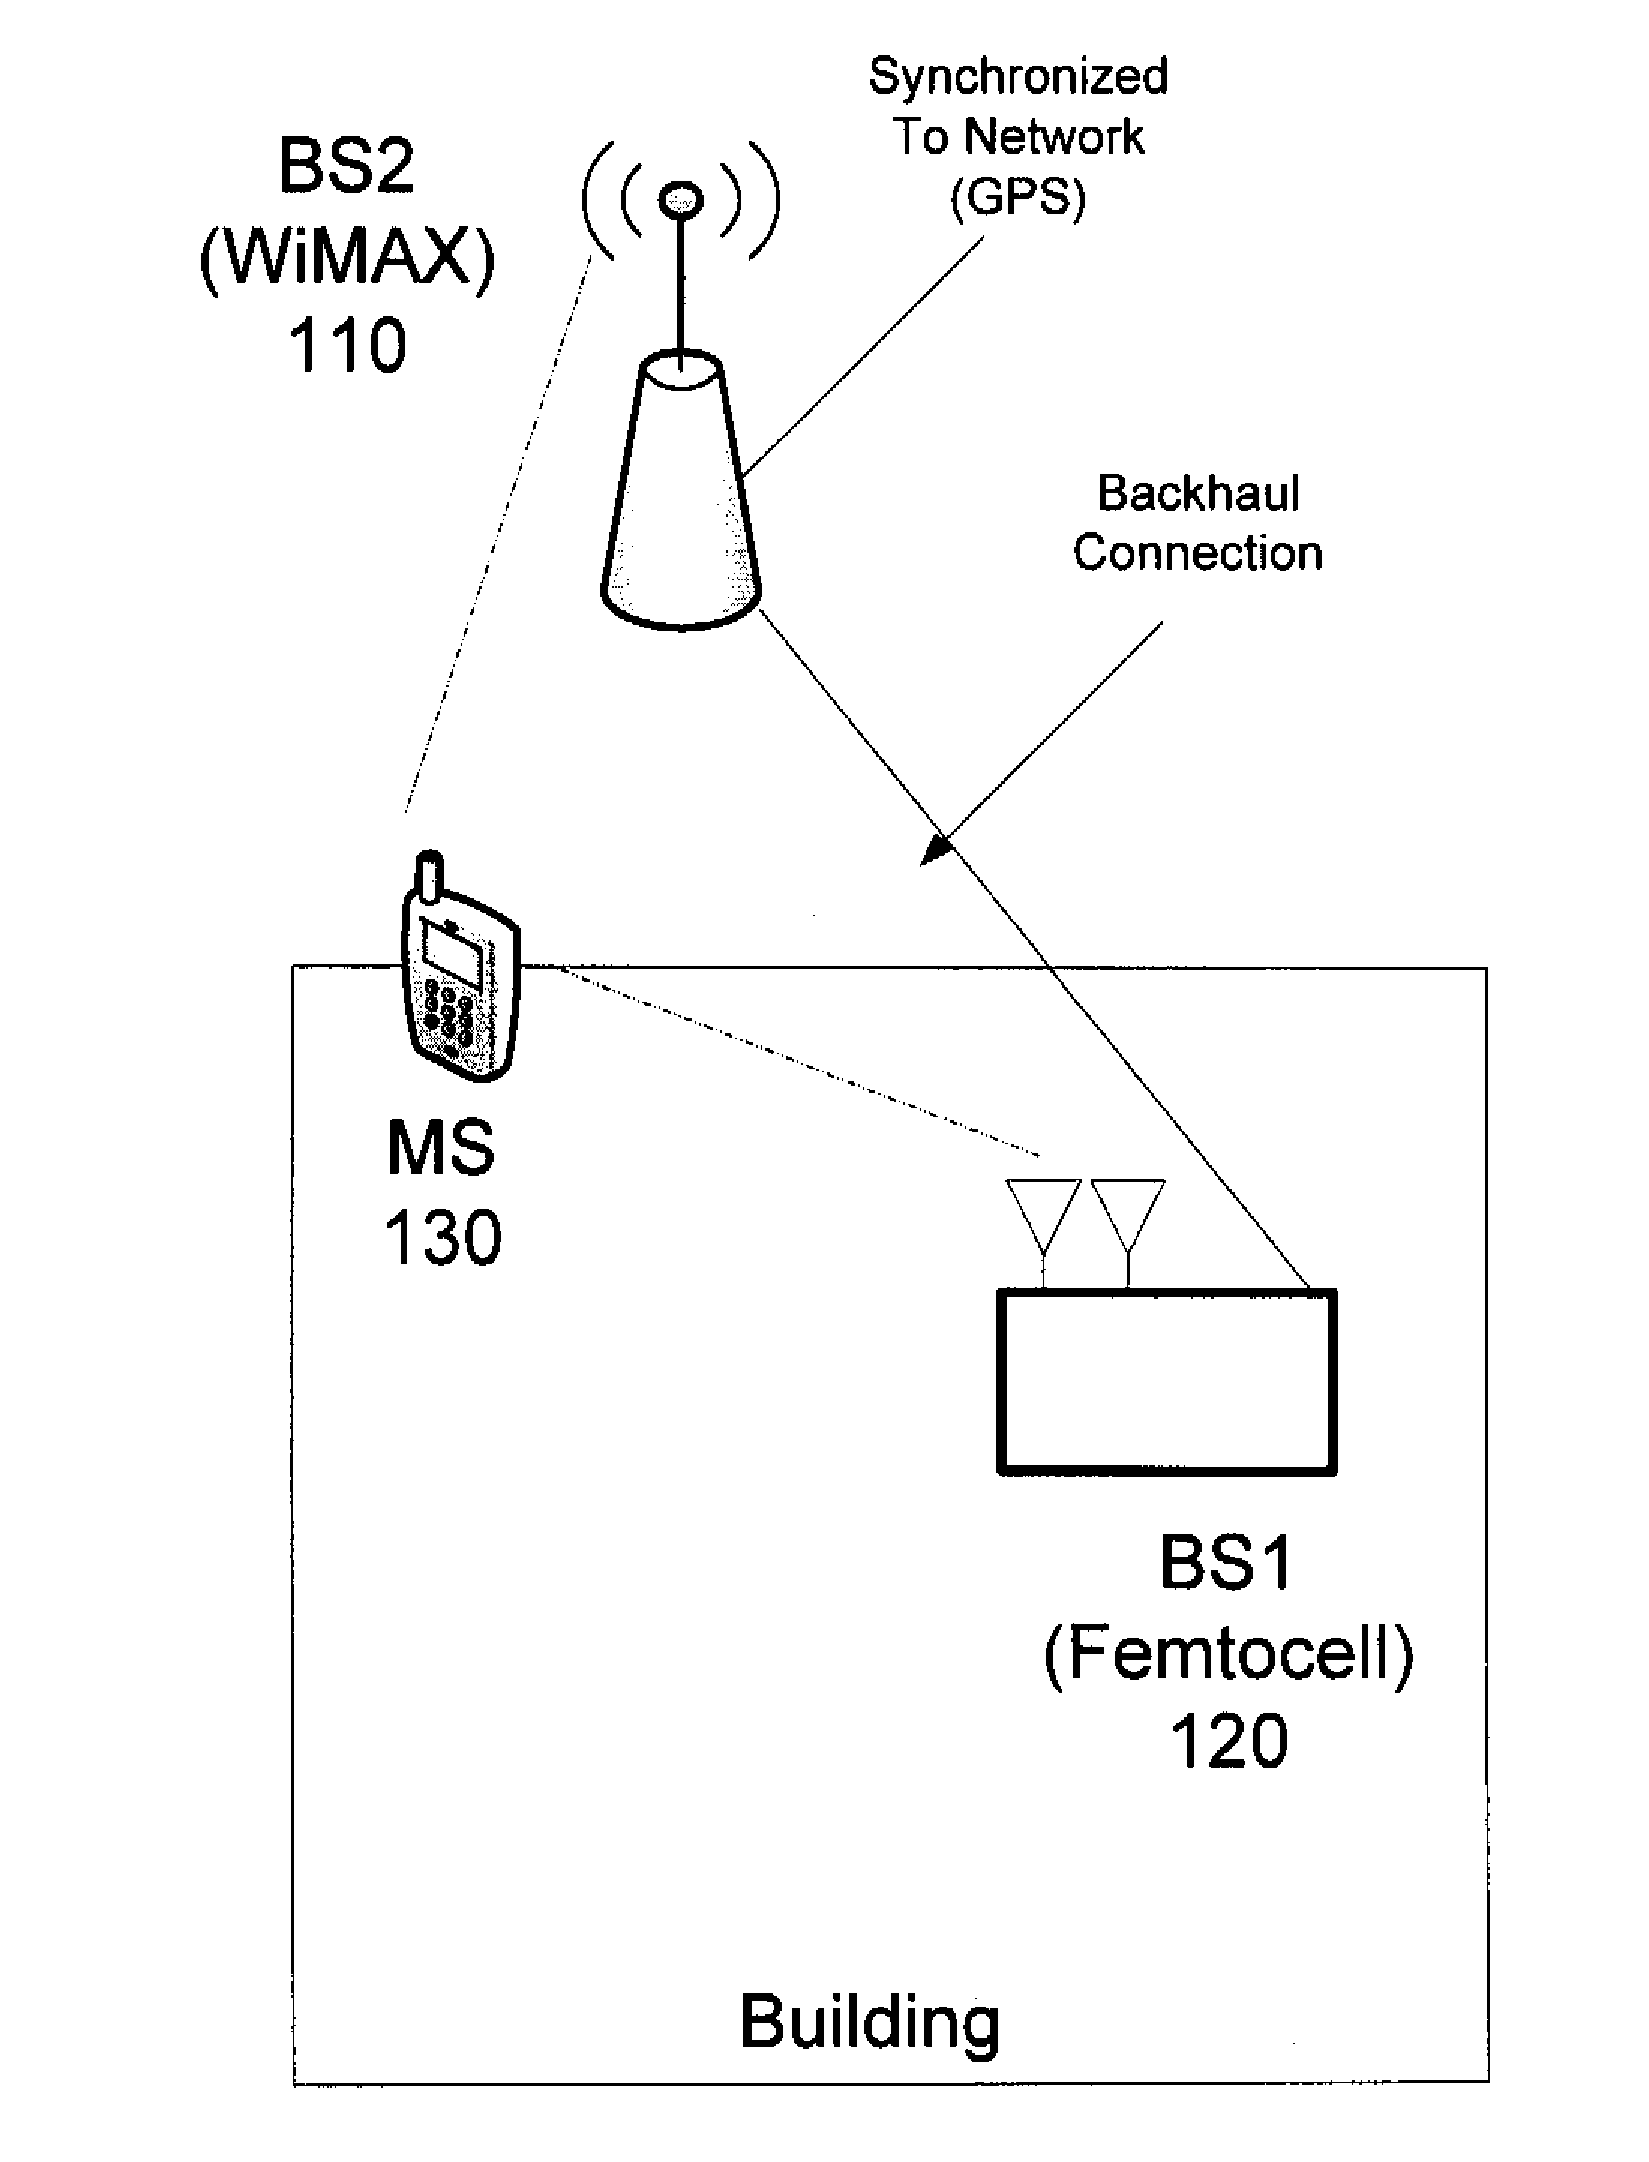 Synchronization and Frame Structure Determination of a Base Station